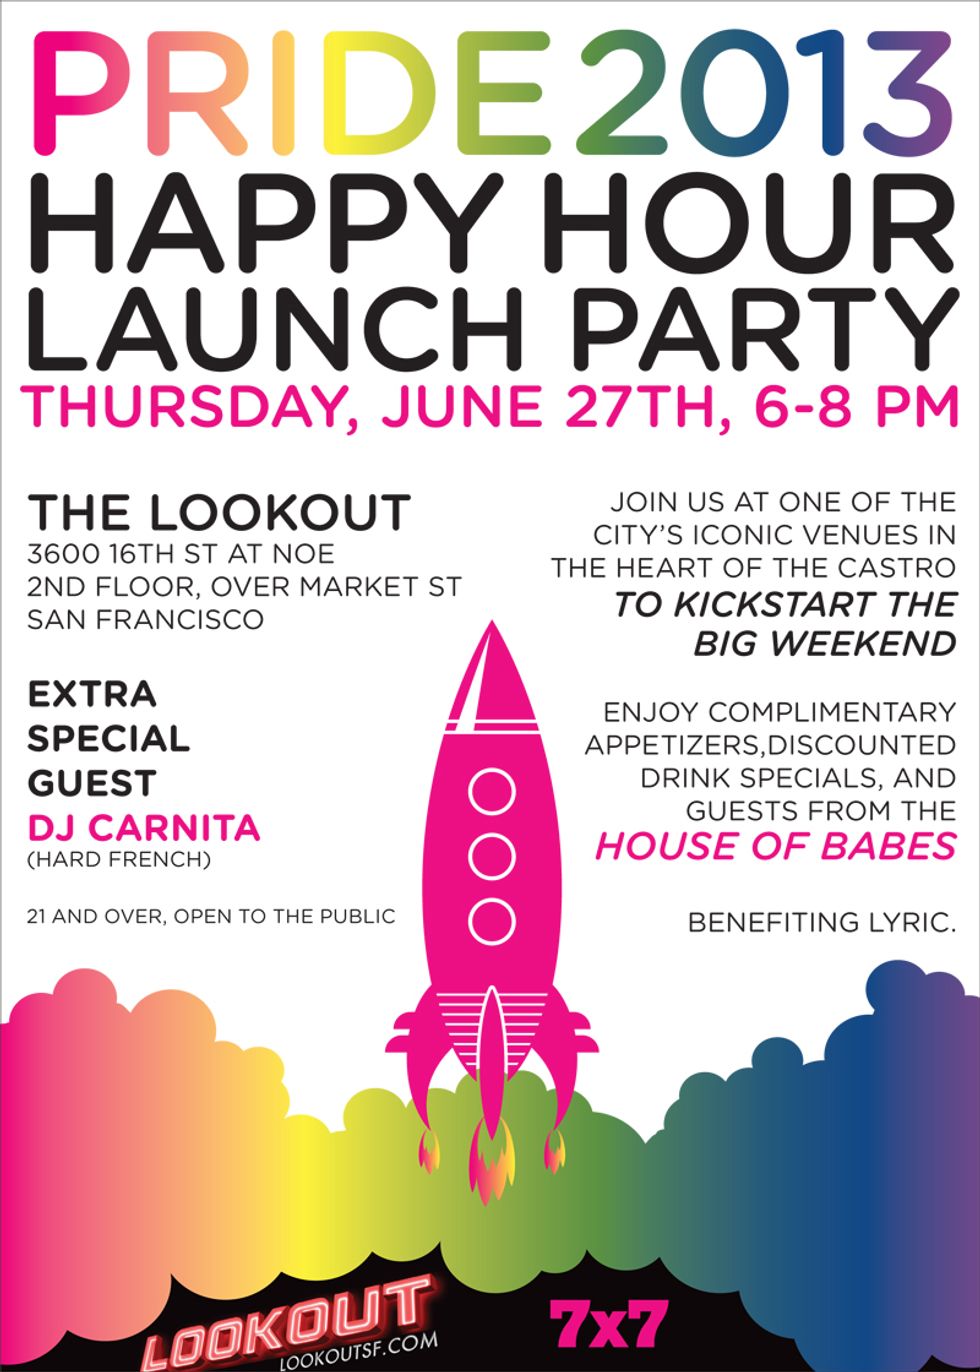 You're Invited: 7x7's Pride 2013 Happy Hour Launch Party